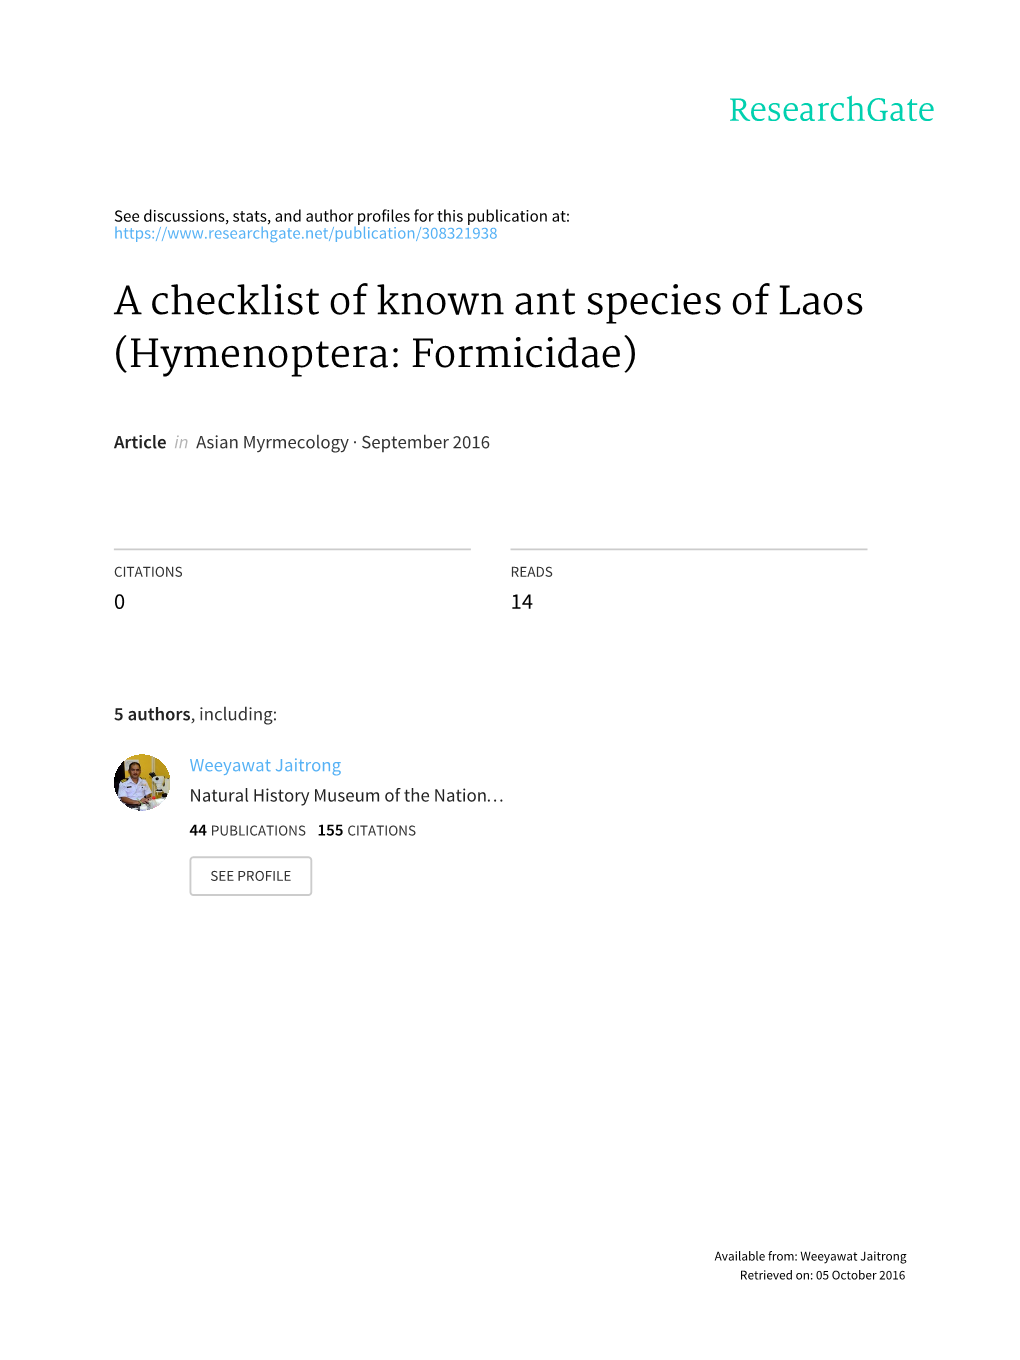 A Checklist of Known Ant Species of Laos (Hymenoptera: Formicidae)